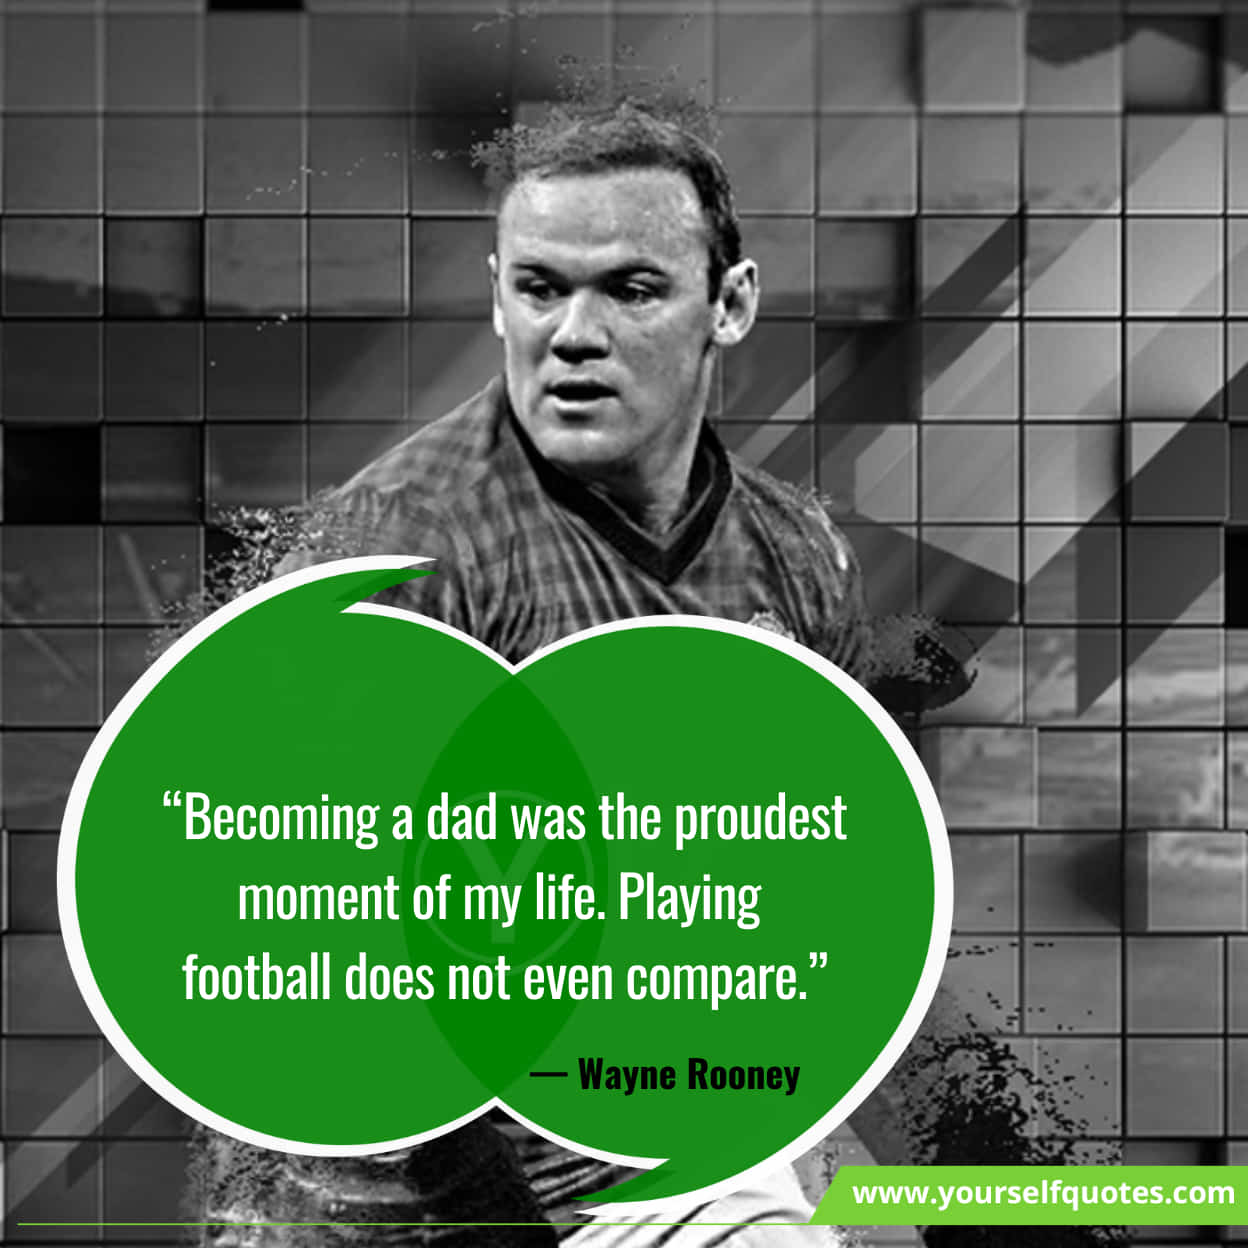 Wayne Rooney Quotes For Football